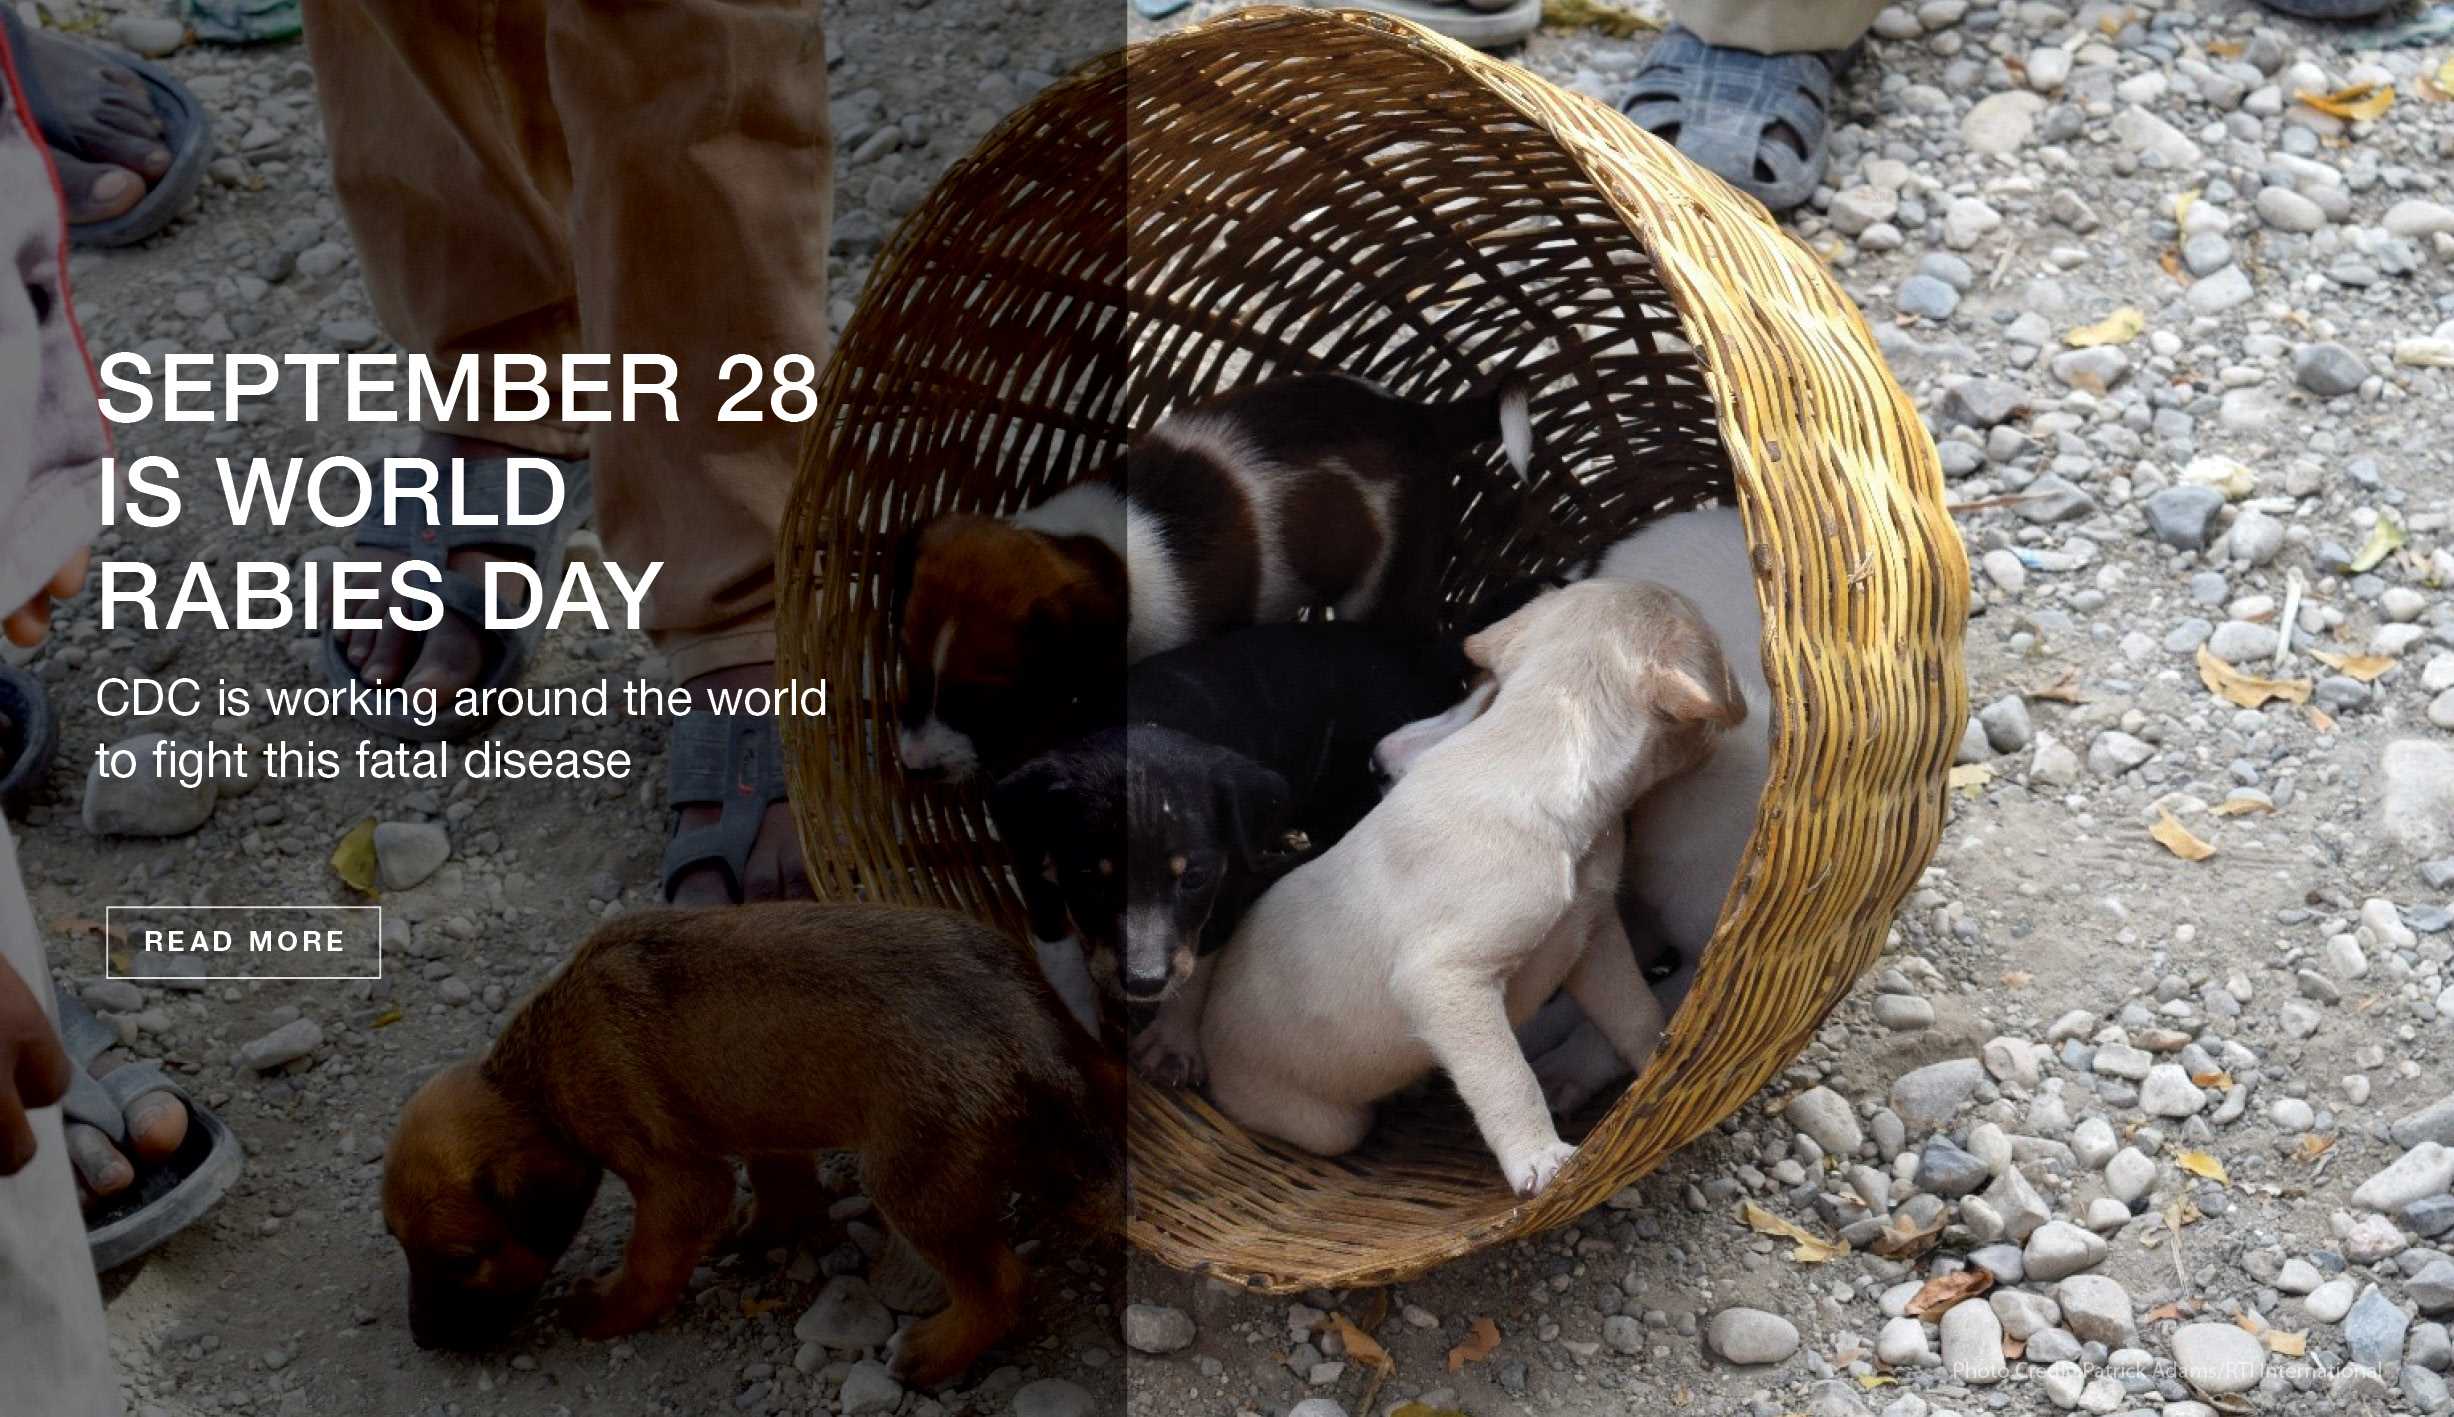 September 28 is world rabies day - CDC is working around the clock to fight this fatal disease.